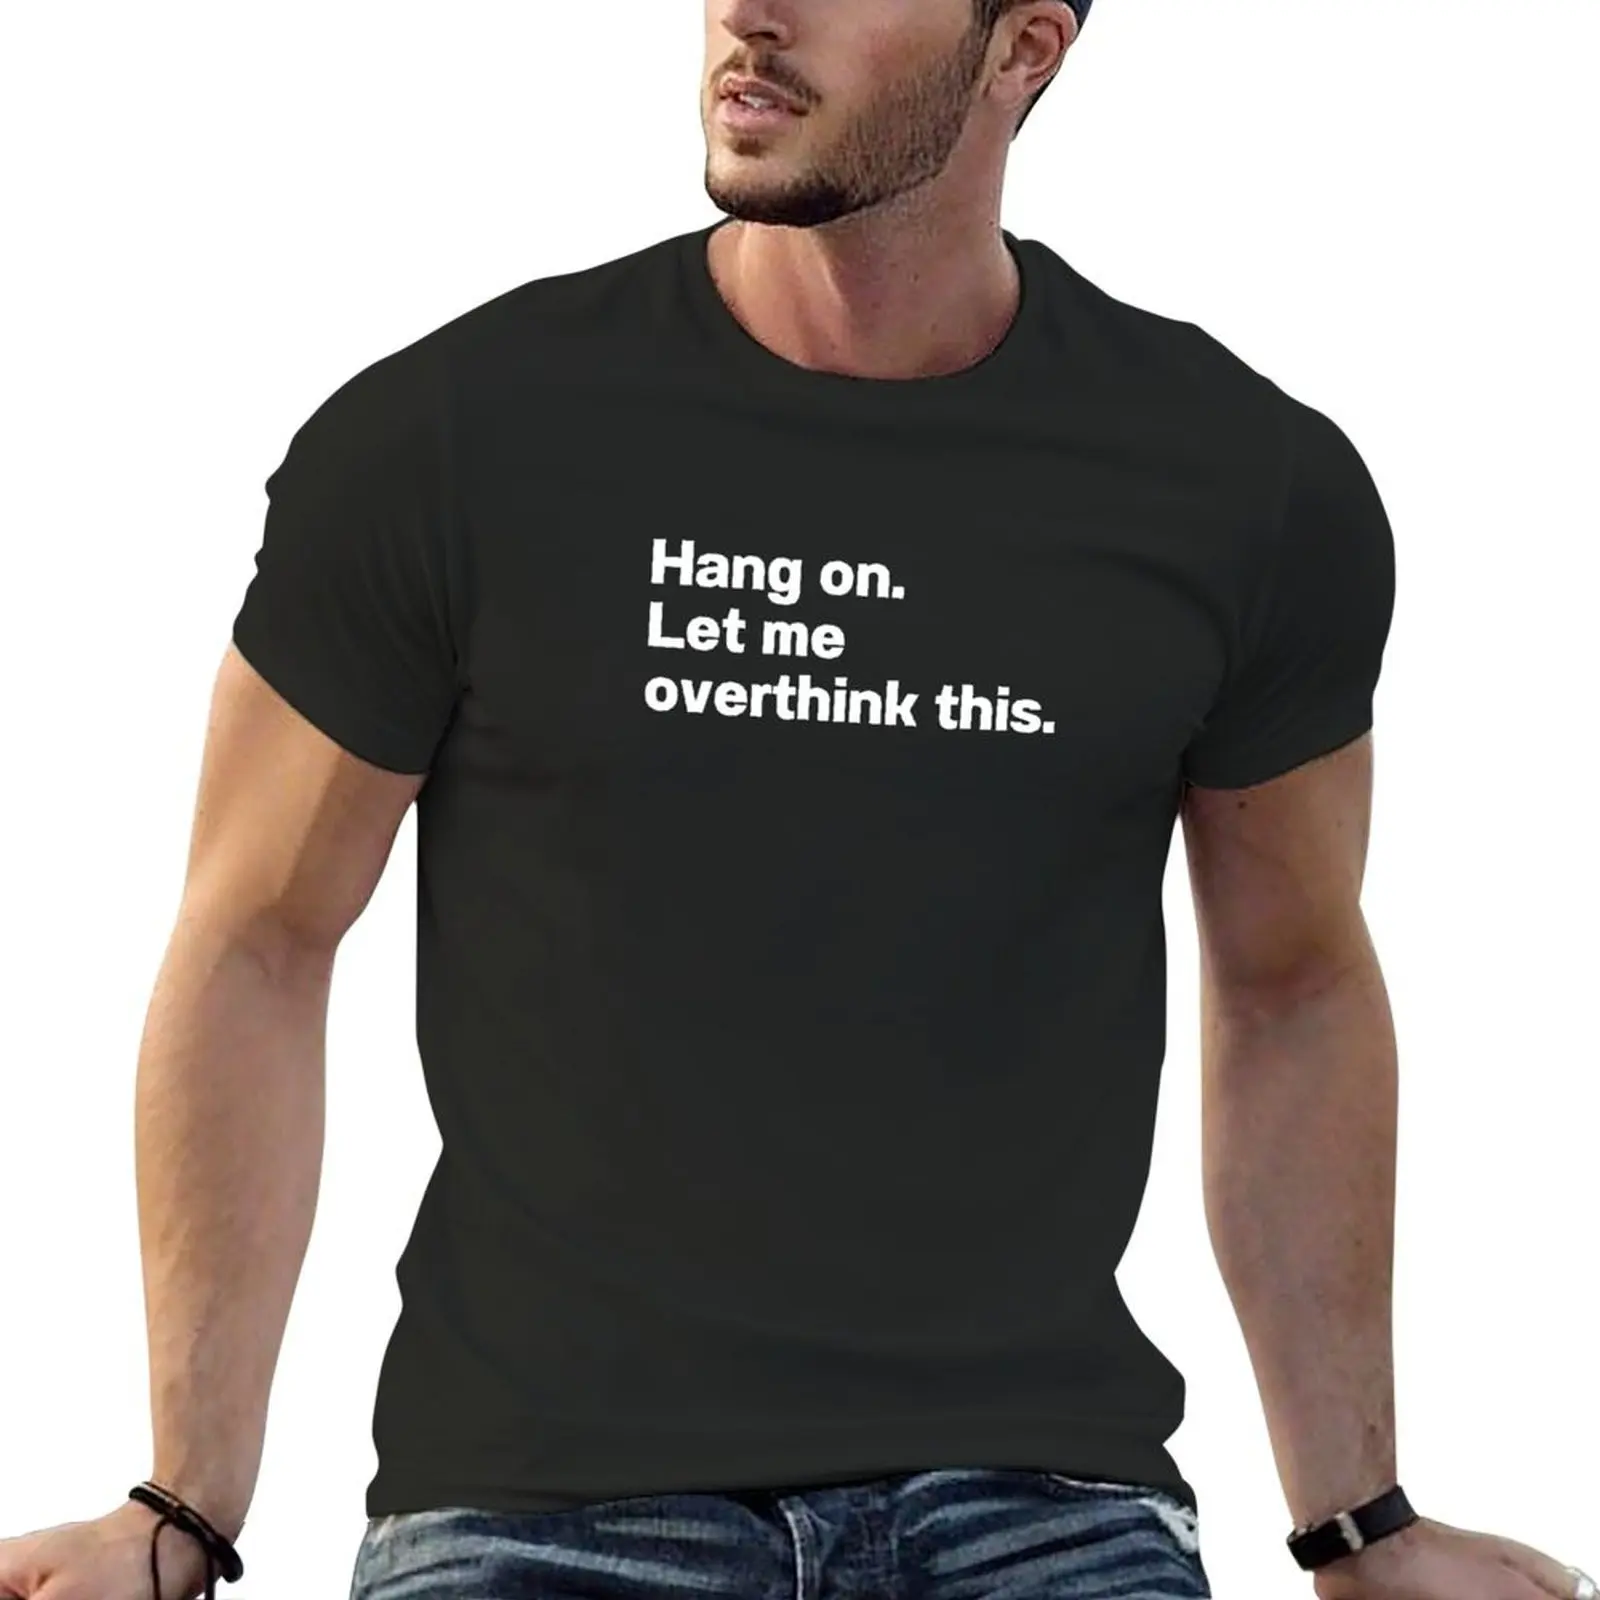 

Hang On Let Me Overthink This T-shirt quick drying oversizeds Short sleeve tee funny t shirts for men